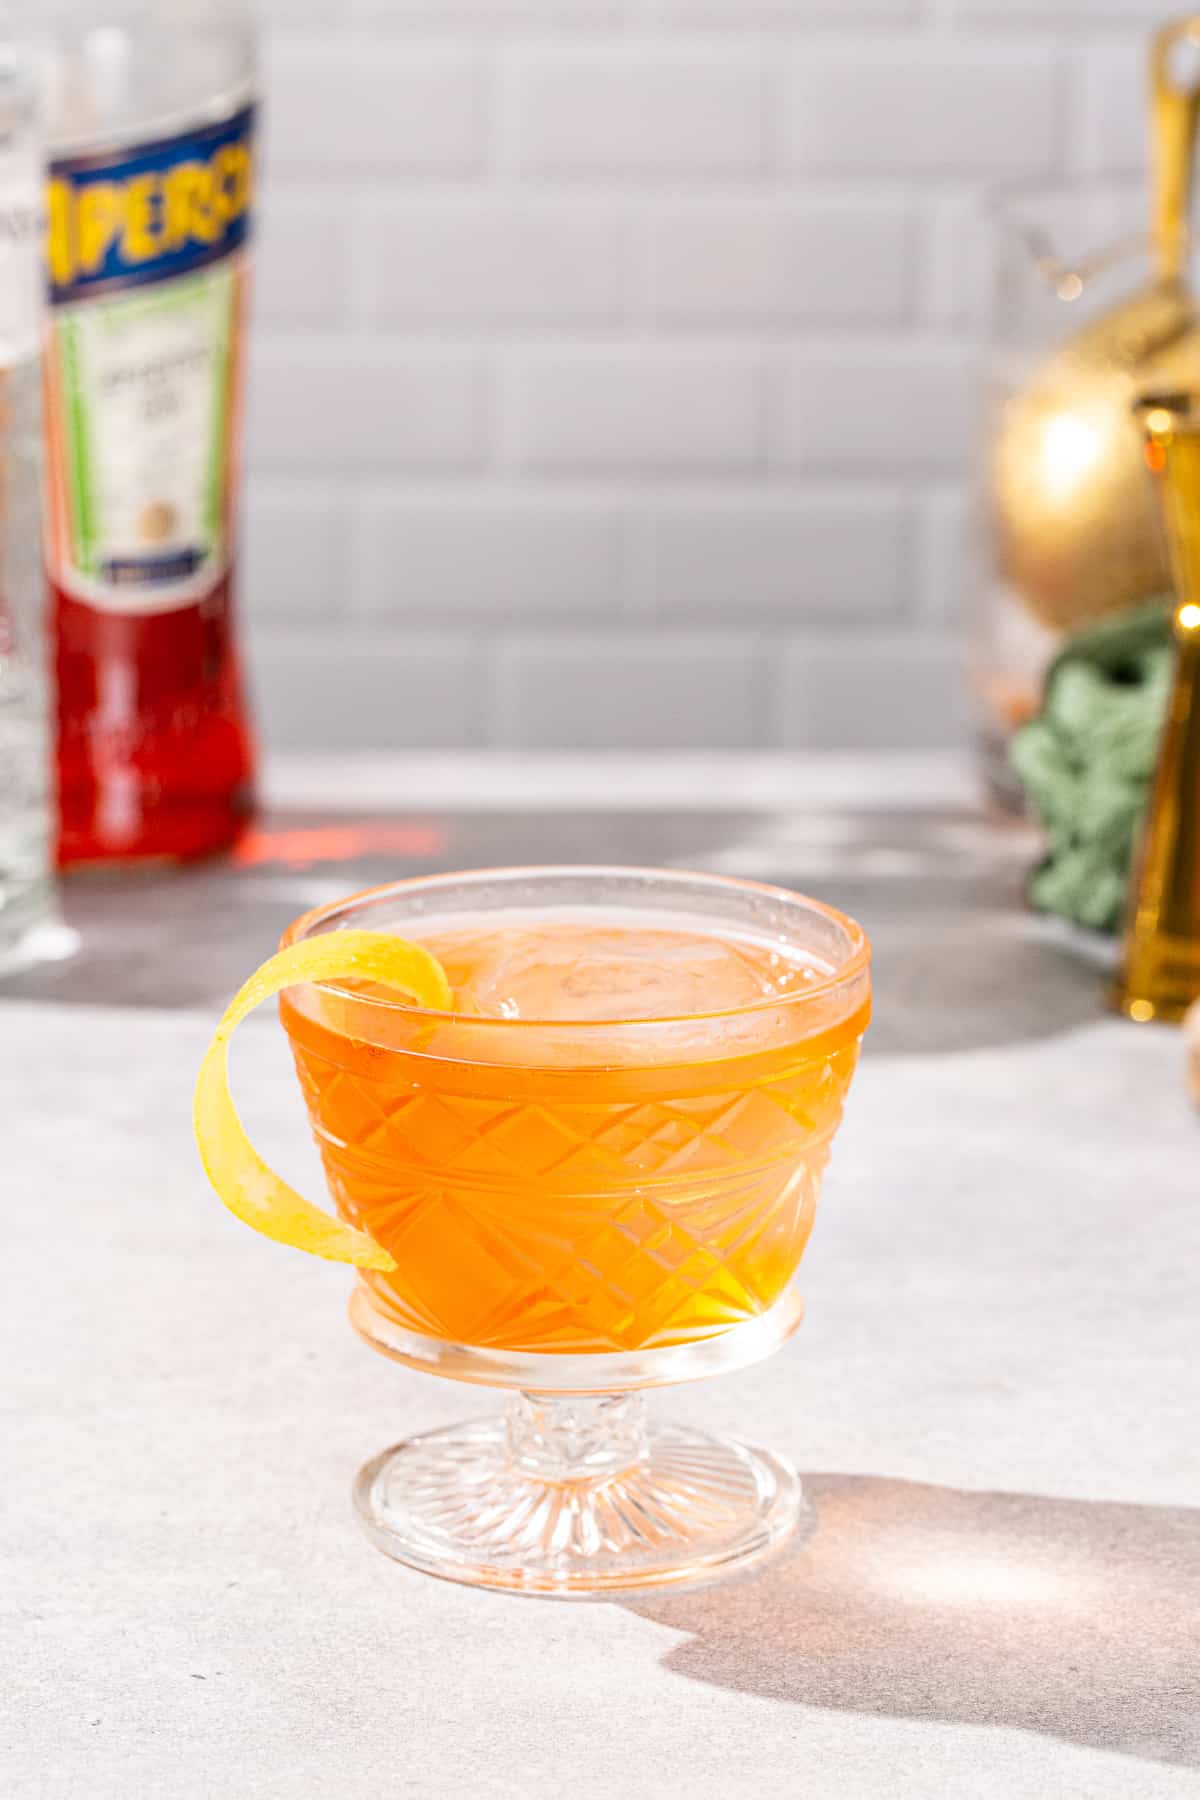 Side view of Aperol Negroni cocktail in a vintage style cocktail glass with a short stem. The drink is orange colored and has a yellow lemon peel garnish. A bottle of gin and aperol are visible in the background along with bar tools.